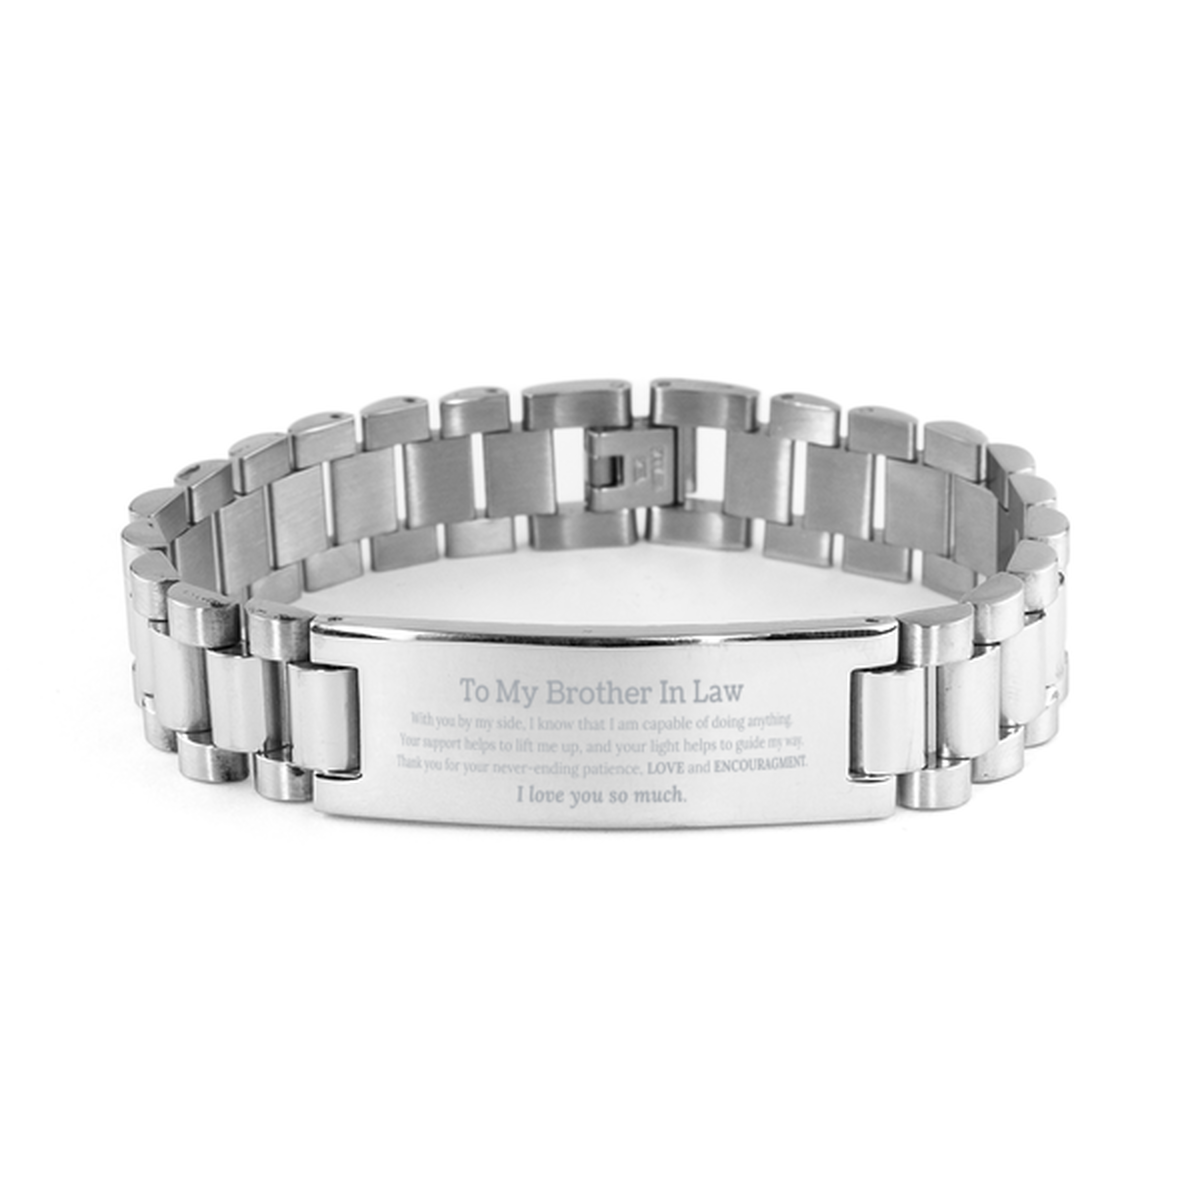 Appreciation Brother In Law Ladder Stainless Steel Bracelet Gifts, To My Brother In Law Birthday Christmas Wedding Keepsake Gifts for Brother In Law With you by my side, I know that I am capable of doing anything. I love you so much